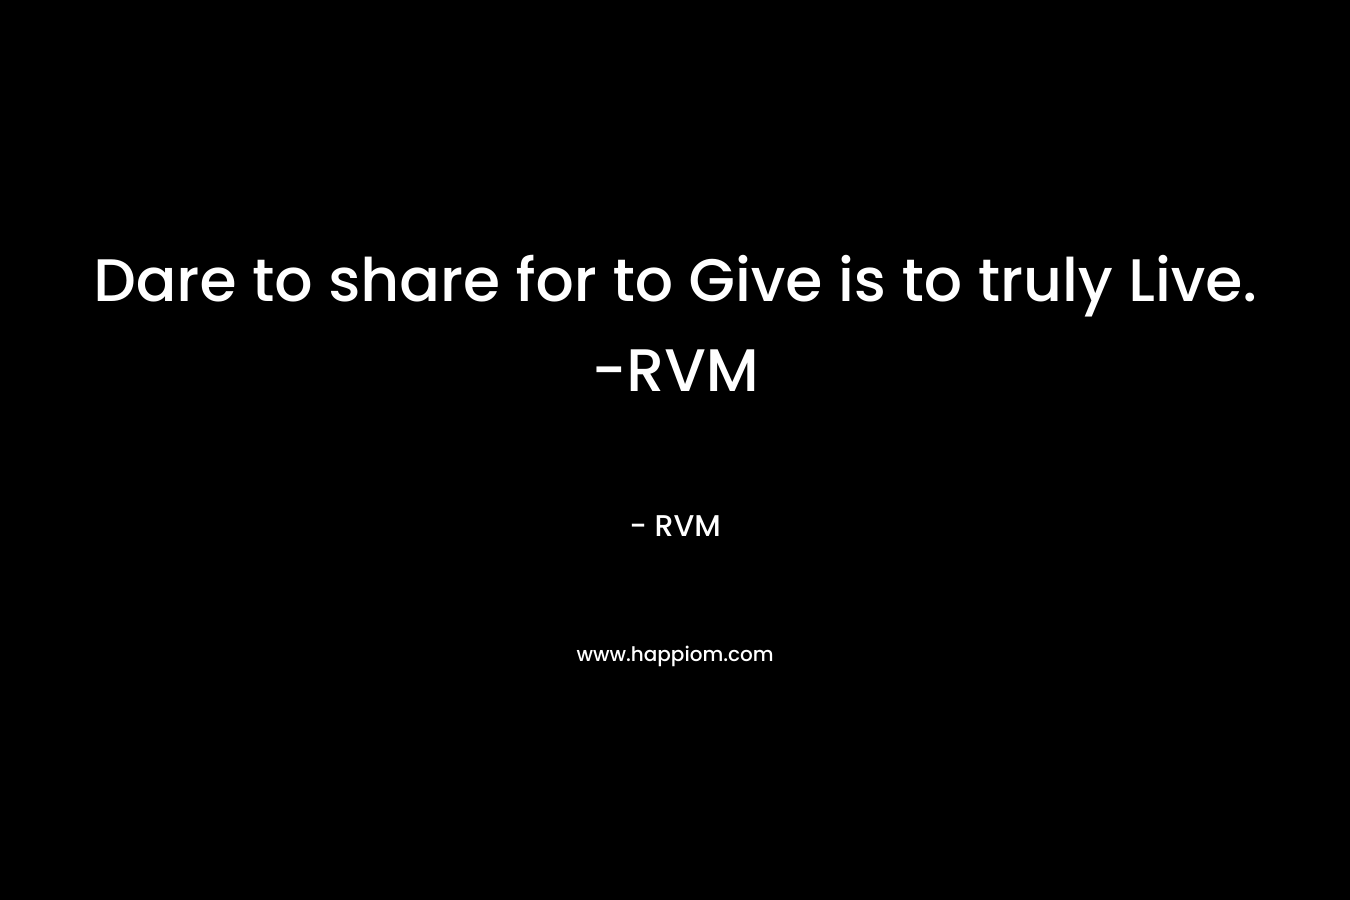 Dare to share for to Give is to truly Live. -RVM